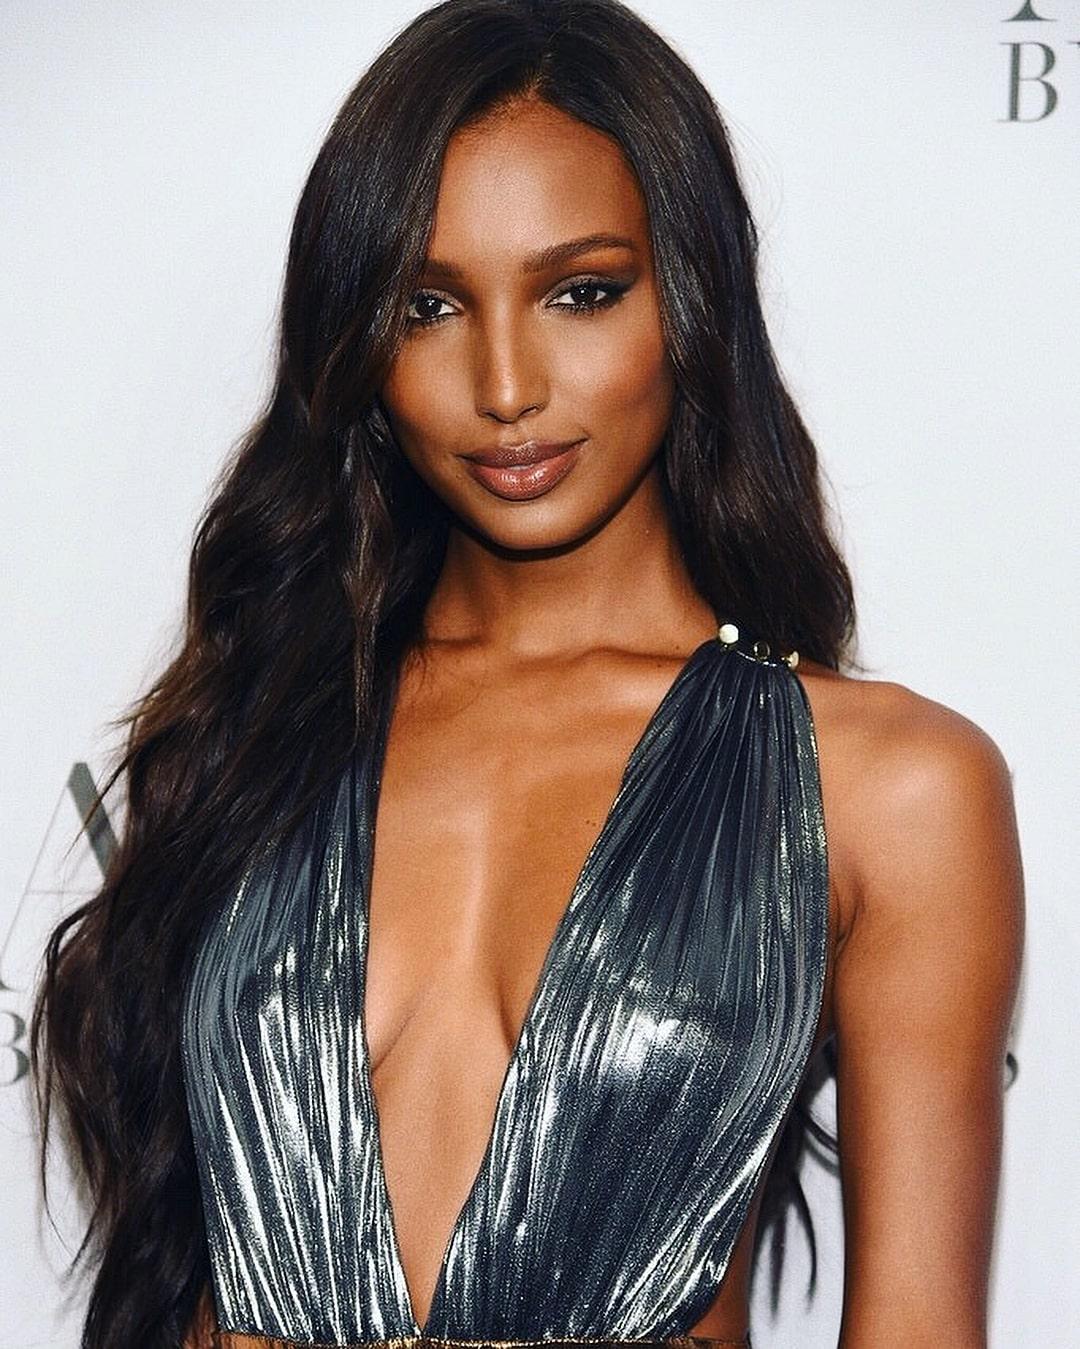 51 Hottest Jasmine Tookes Big Butt Pictures That Will Make Your Heart Pound For Her 29